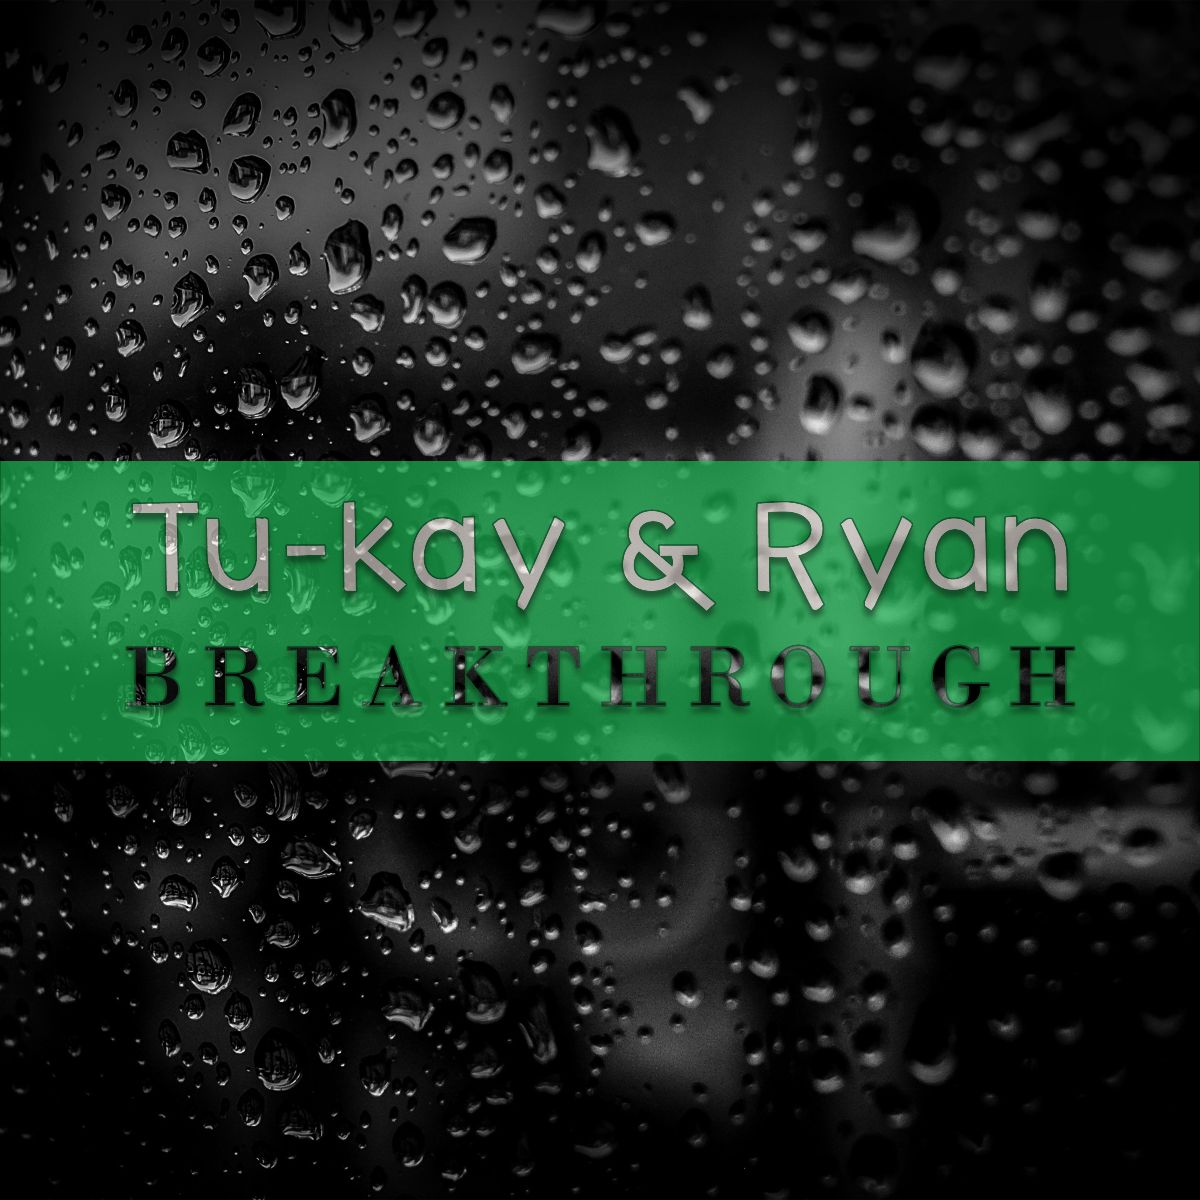 Radio Play
‘Breakthrough’ by Tu-kay & Ryan will be played on the Finding Land Folk Show on Tuesday 23rd May linktr.ee/findinglandfol…